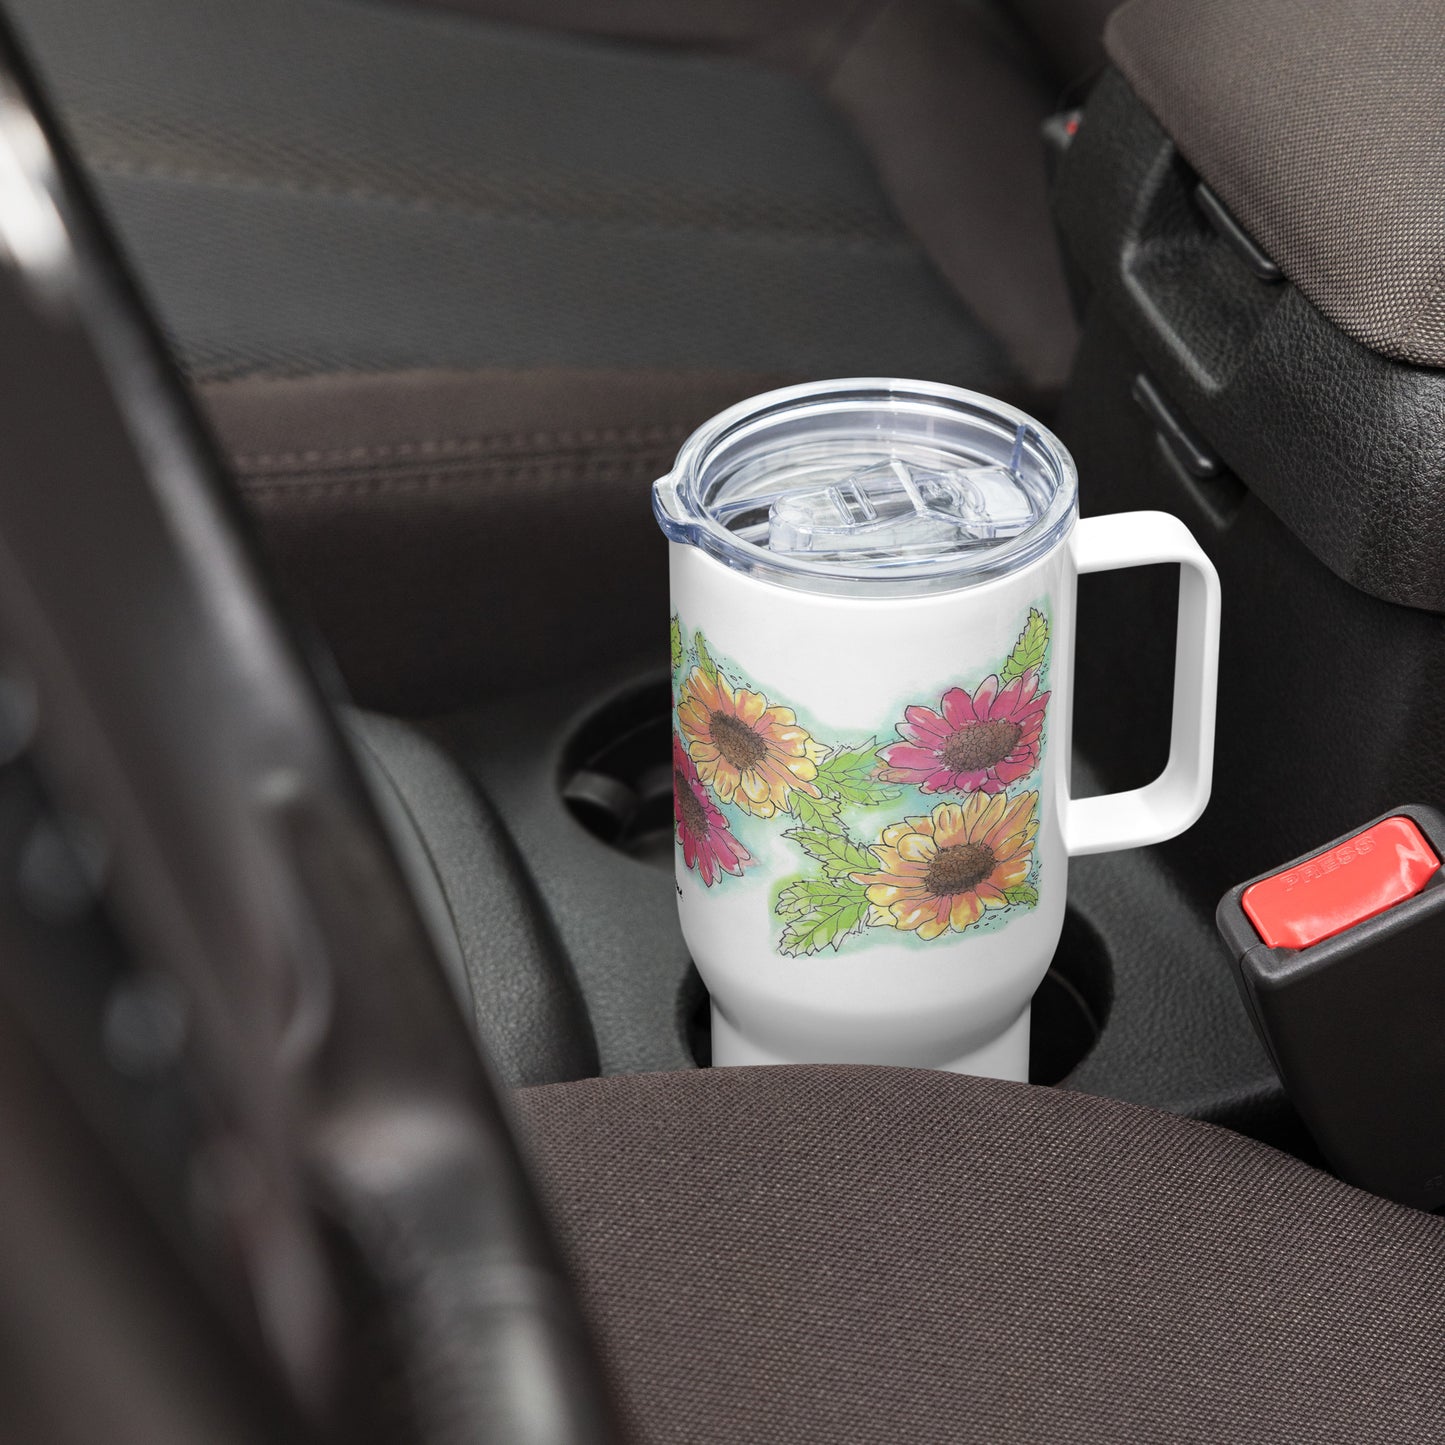 Gerber daisies stainless steel travel mug with handle. Holds 25 ounces and has a BPA-free plastic lid. Shown in car drink holder.